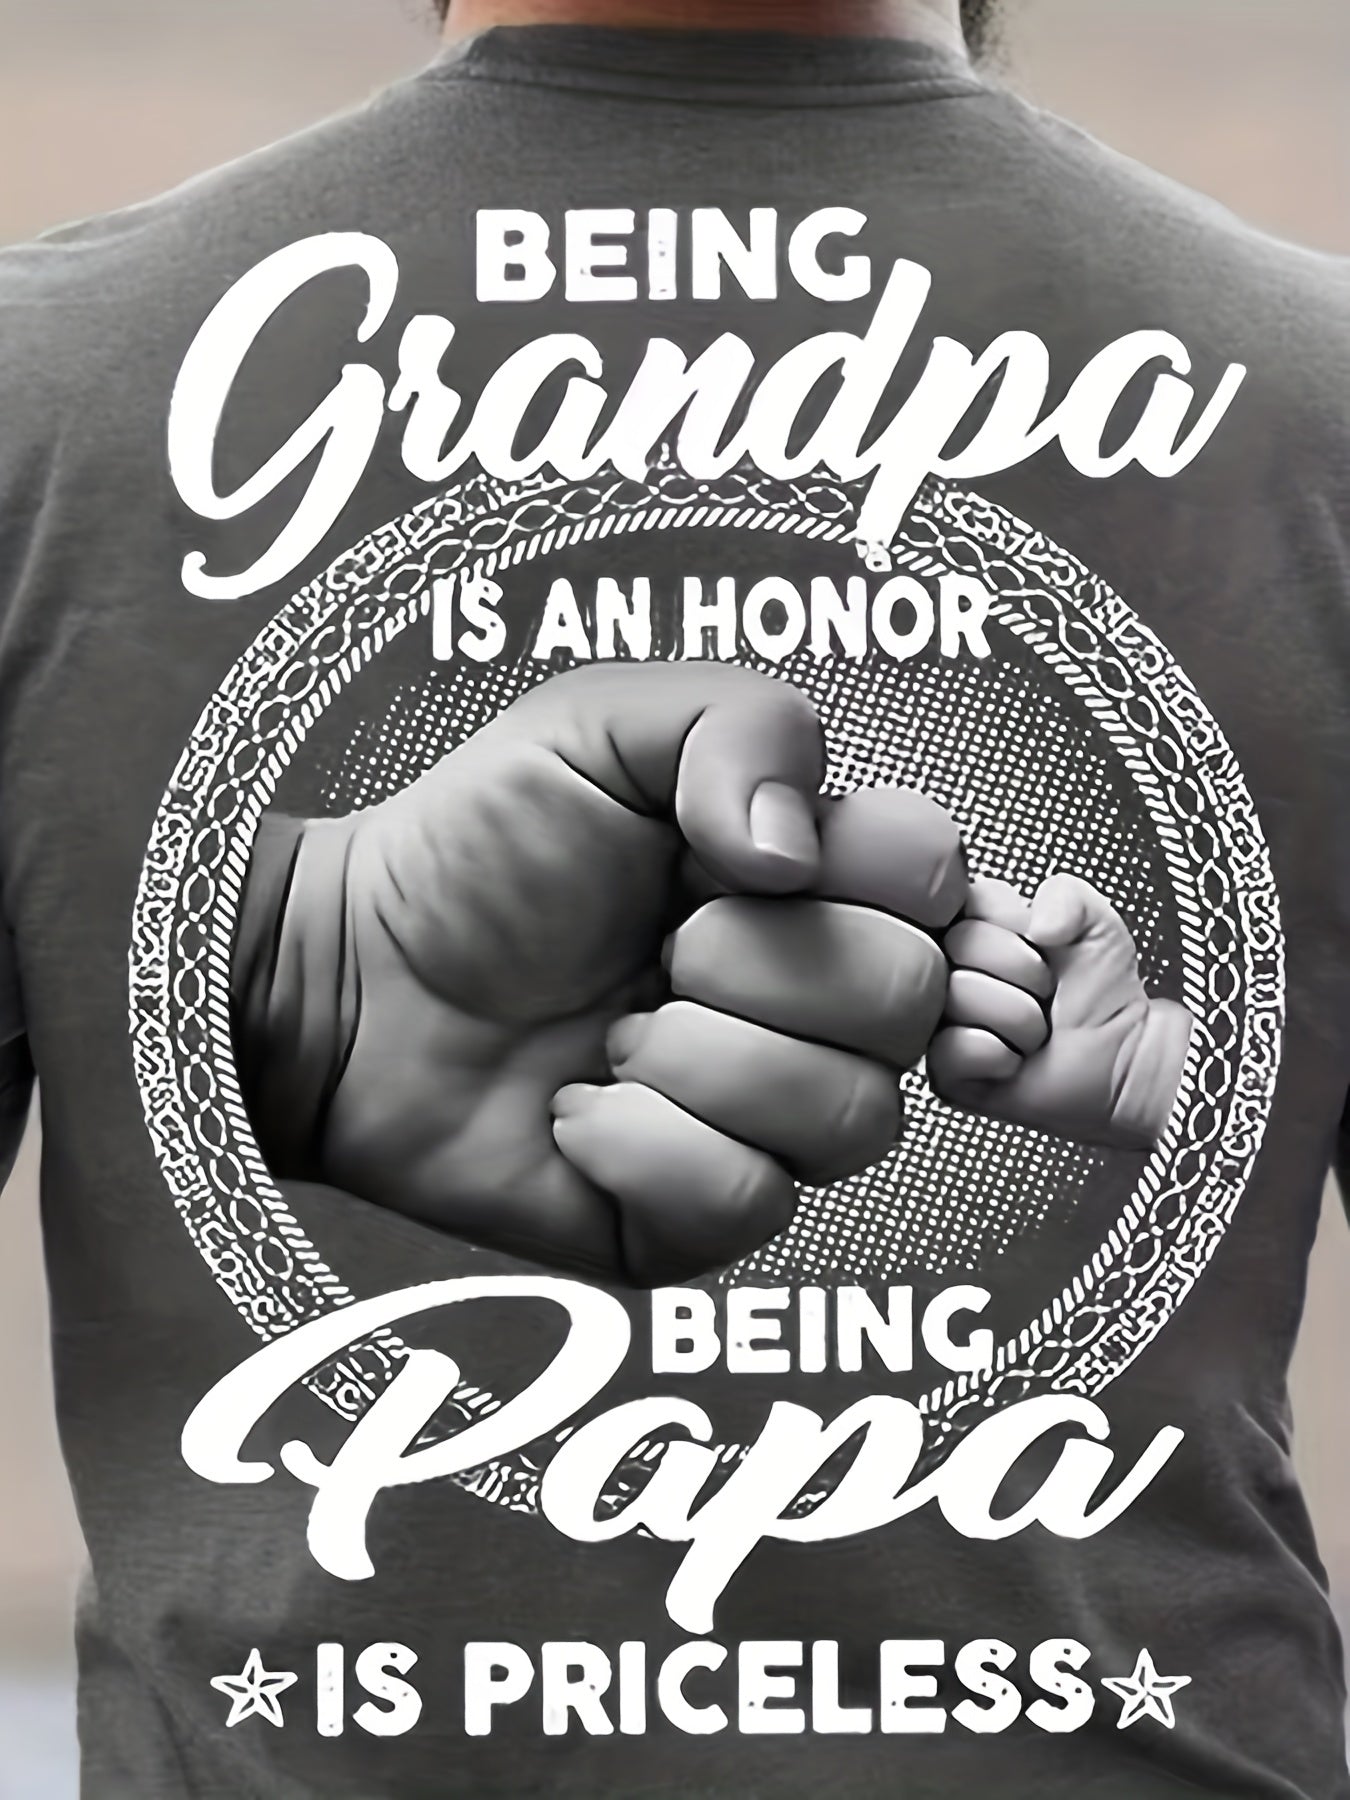 Men's Trendy T-shirt For Summer Outdoor, Casual "Being Grandpa Being Papa" Letter Print Slightly Stretch Crew Neck Tee Short Sleeve Stylish Clothing